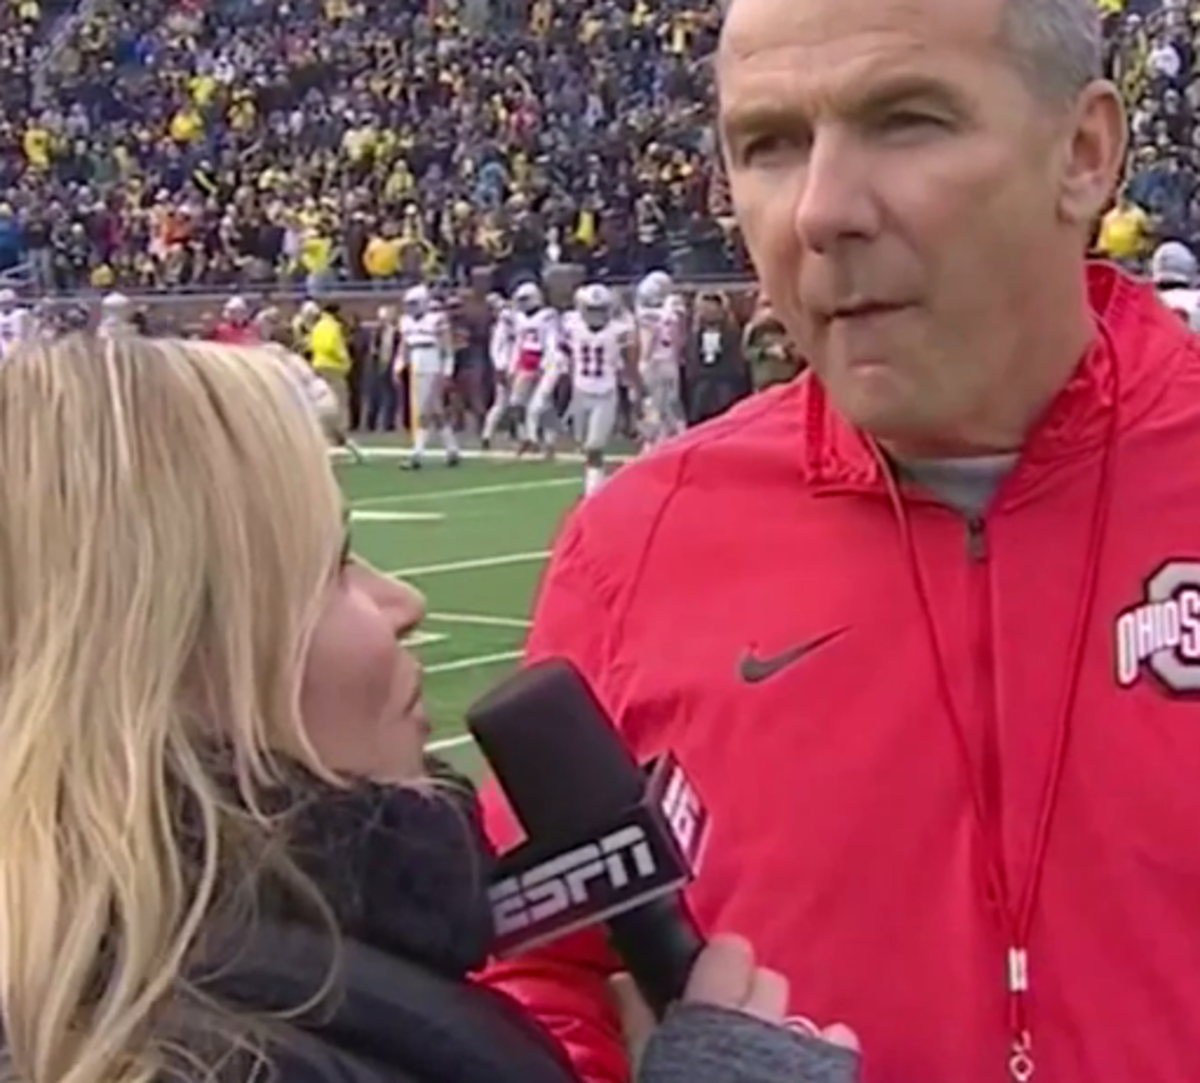 Urban Meyer gets interviewed by Holly Rowe on ESPN.